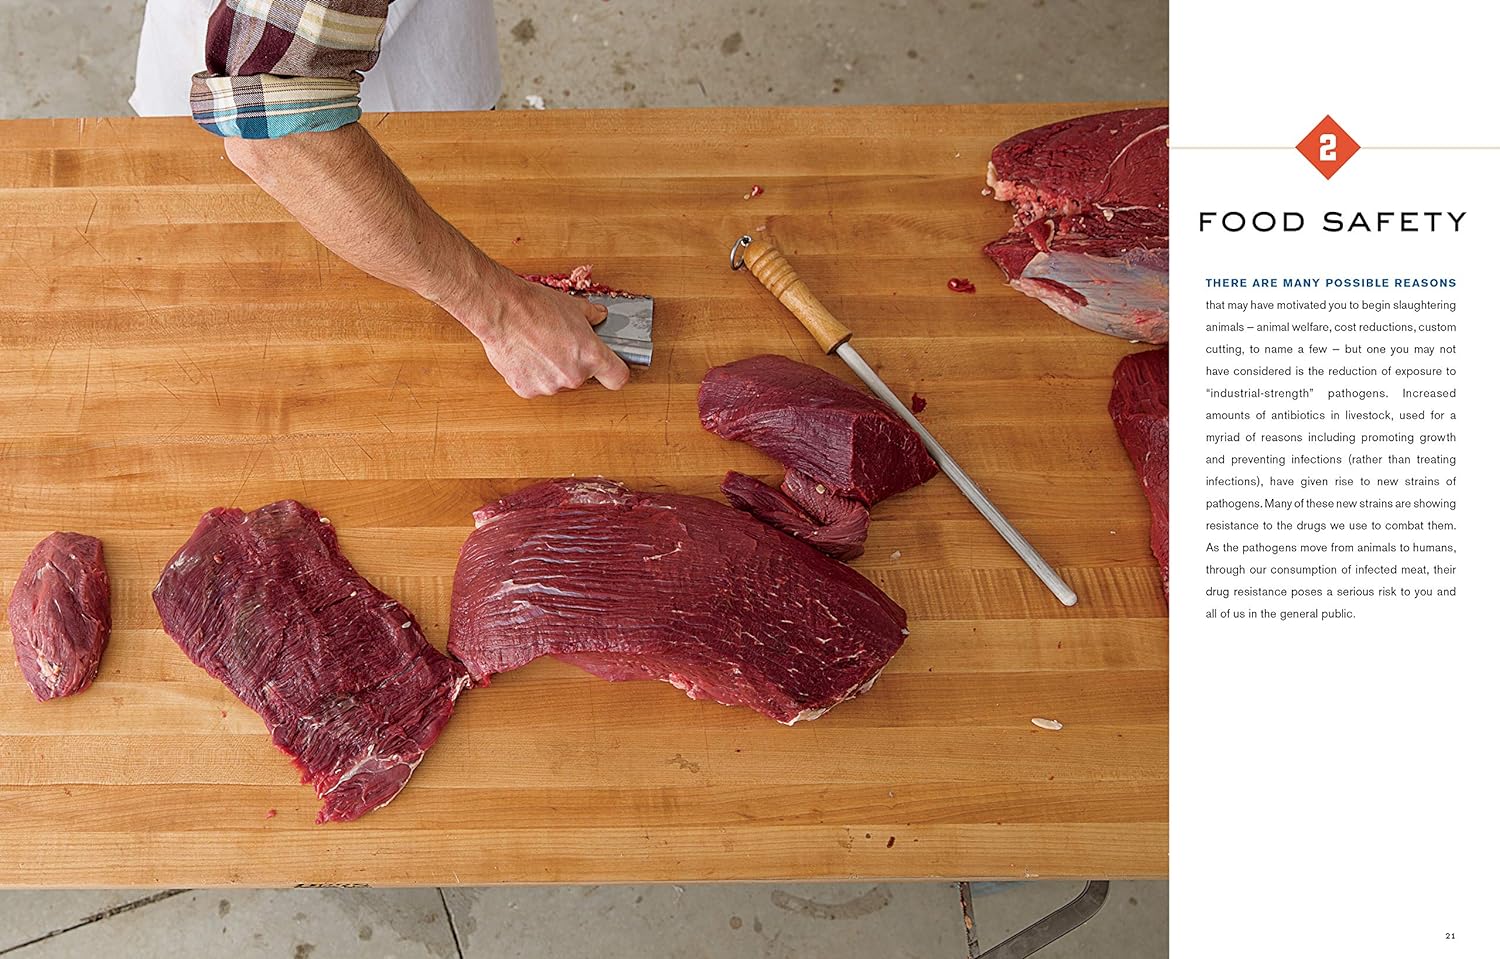 Butchering Beef: The Comprehensive Photographic Guide to Humane Slaughtering and Butchering Paperback by Adam Danforth